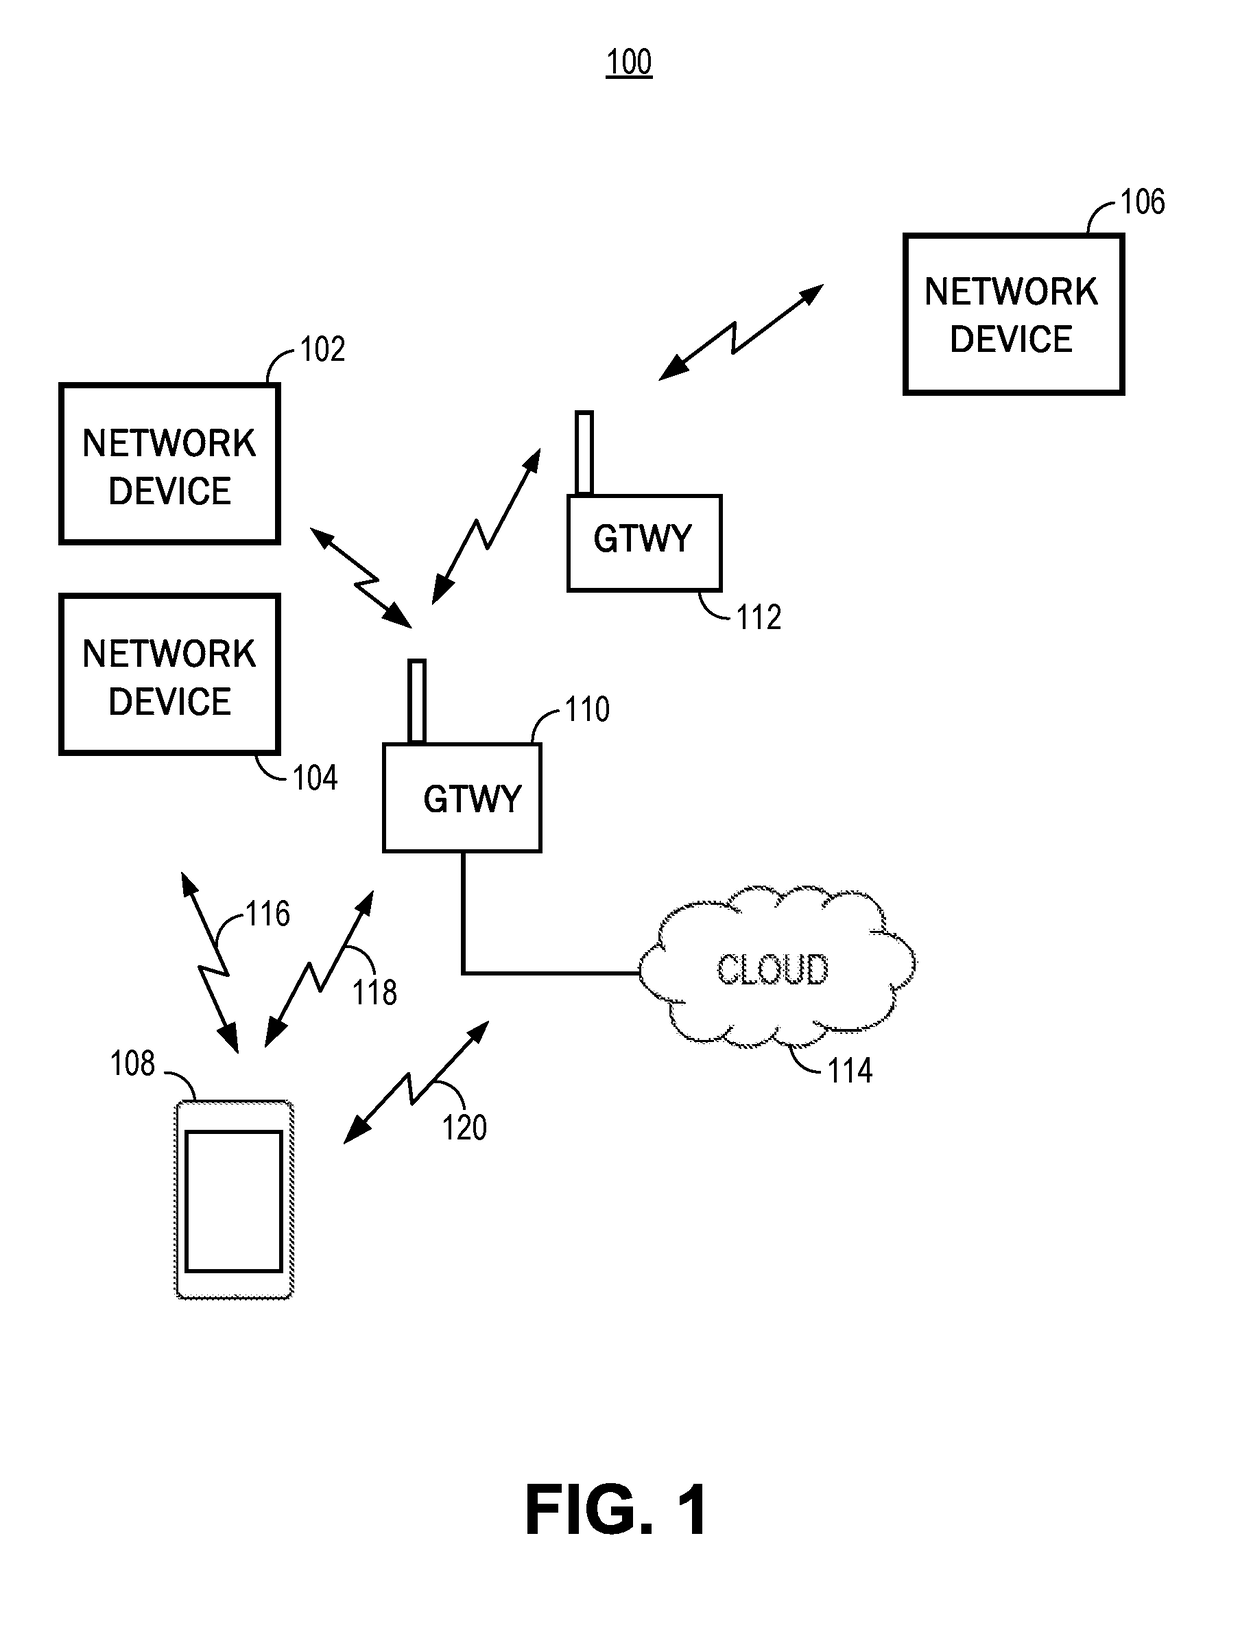 Associating devices and users with a local area network using network identifiers